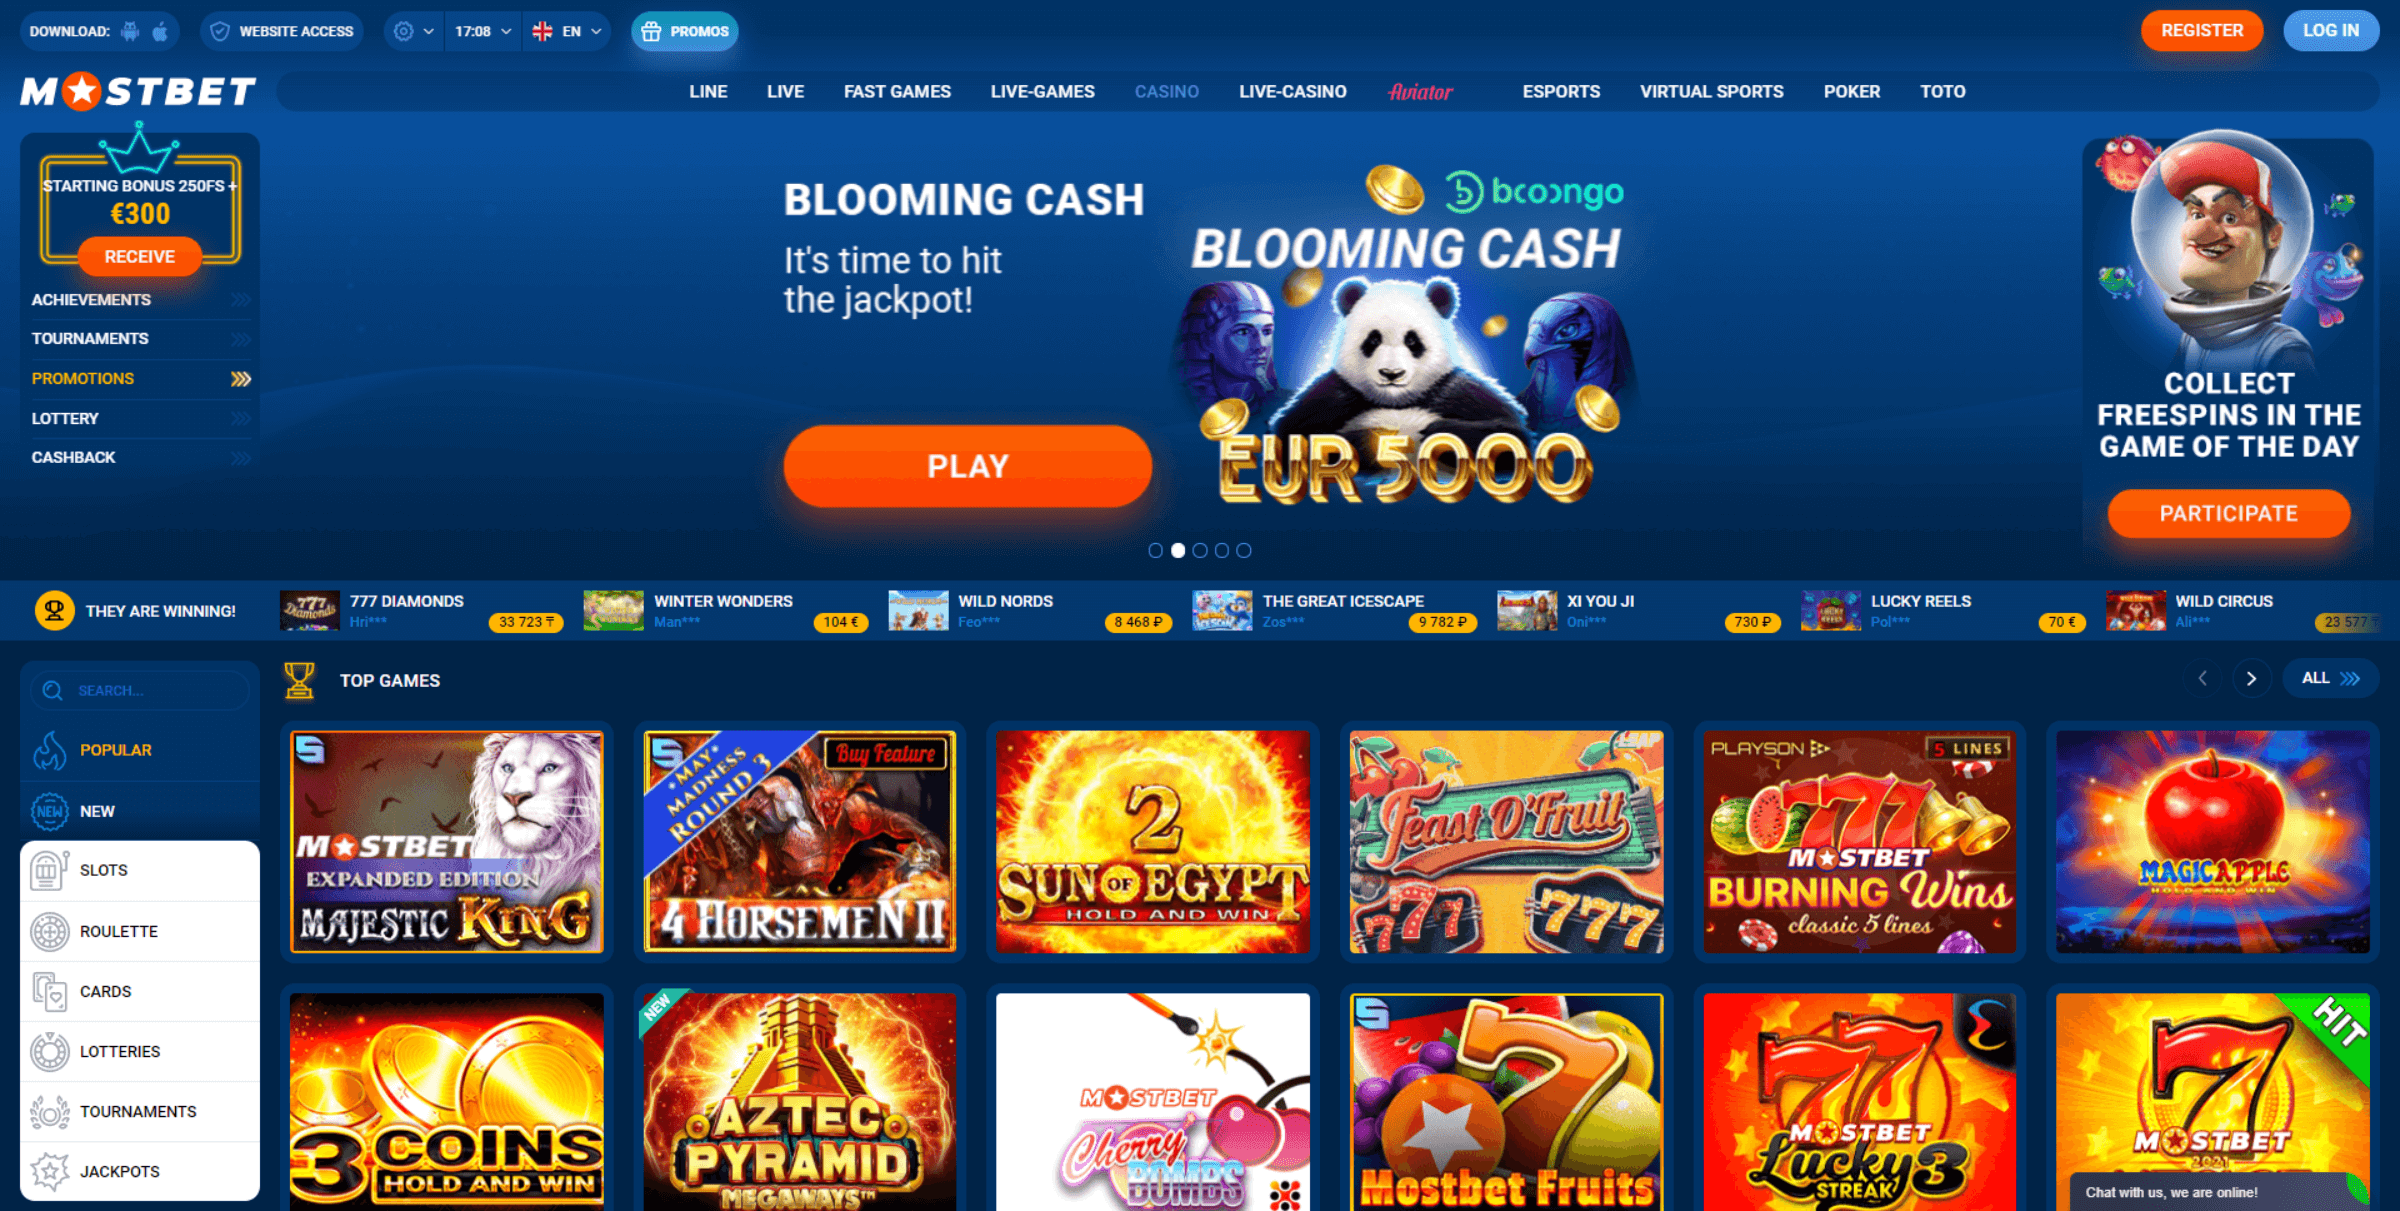 10 Facts Everyone Should Know About Mostbet Online Casino Company